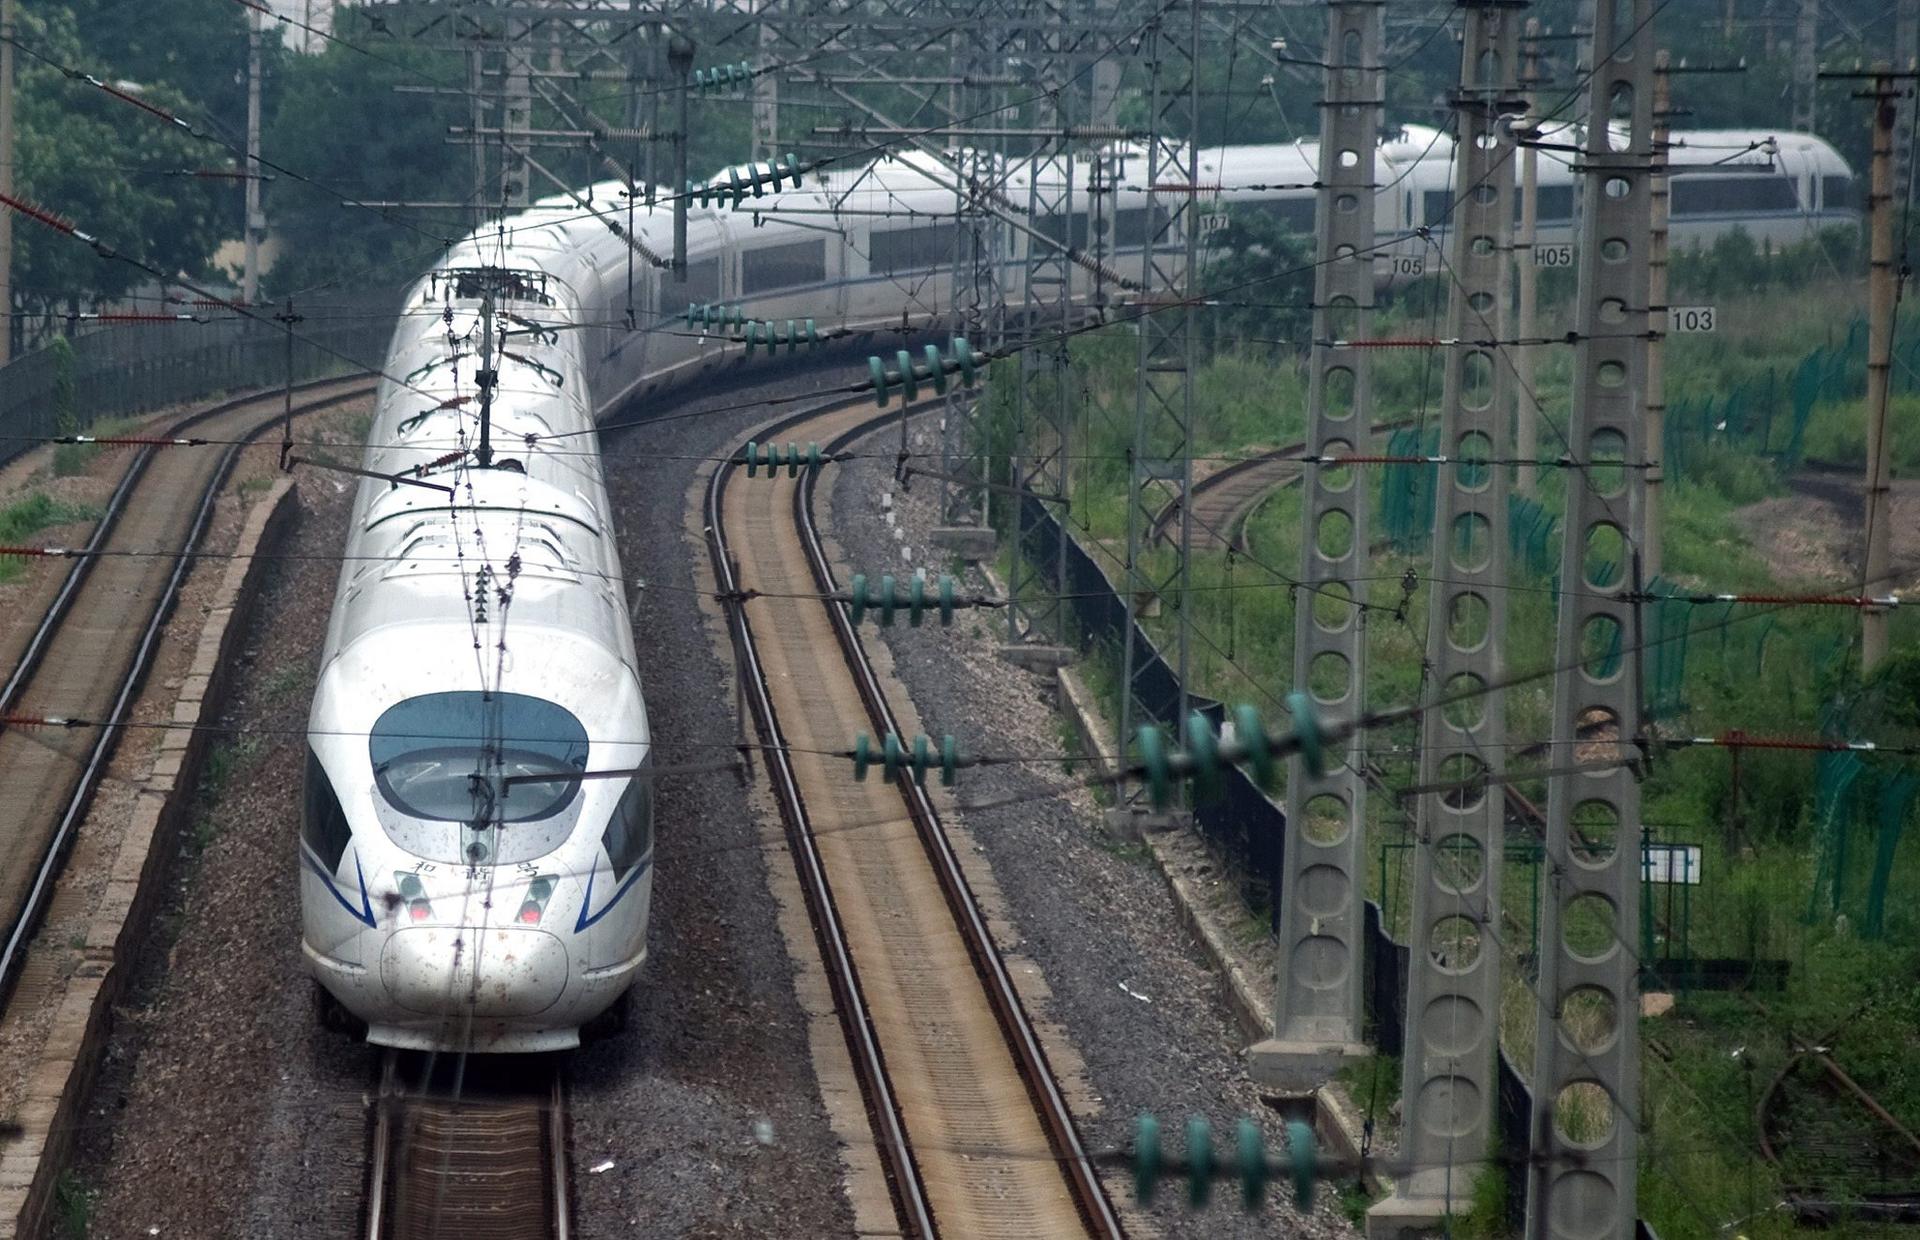 China Railway Corp says it is progressing at full speed on expanding the rail network. Photo: EPA